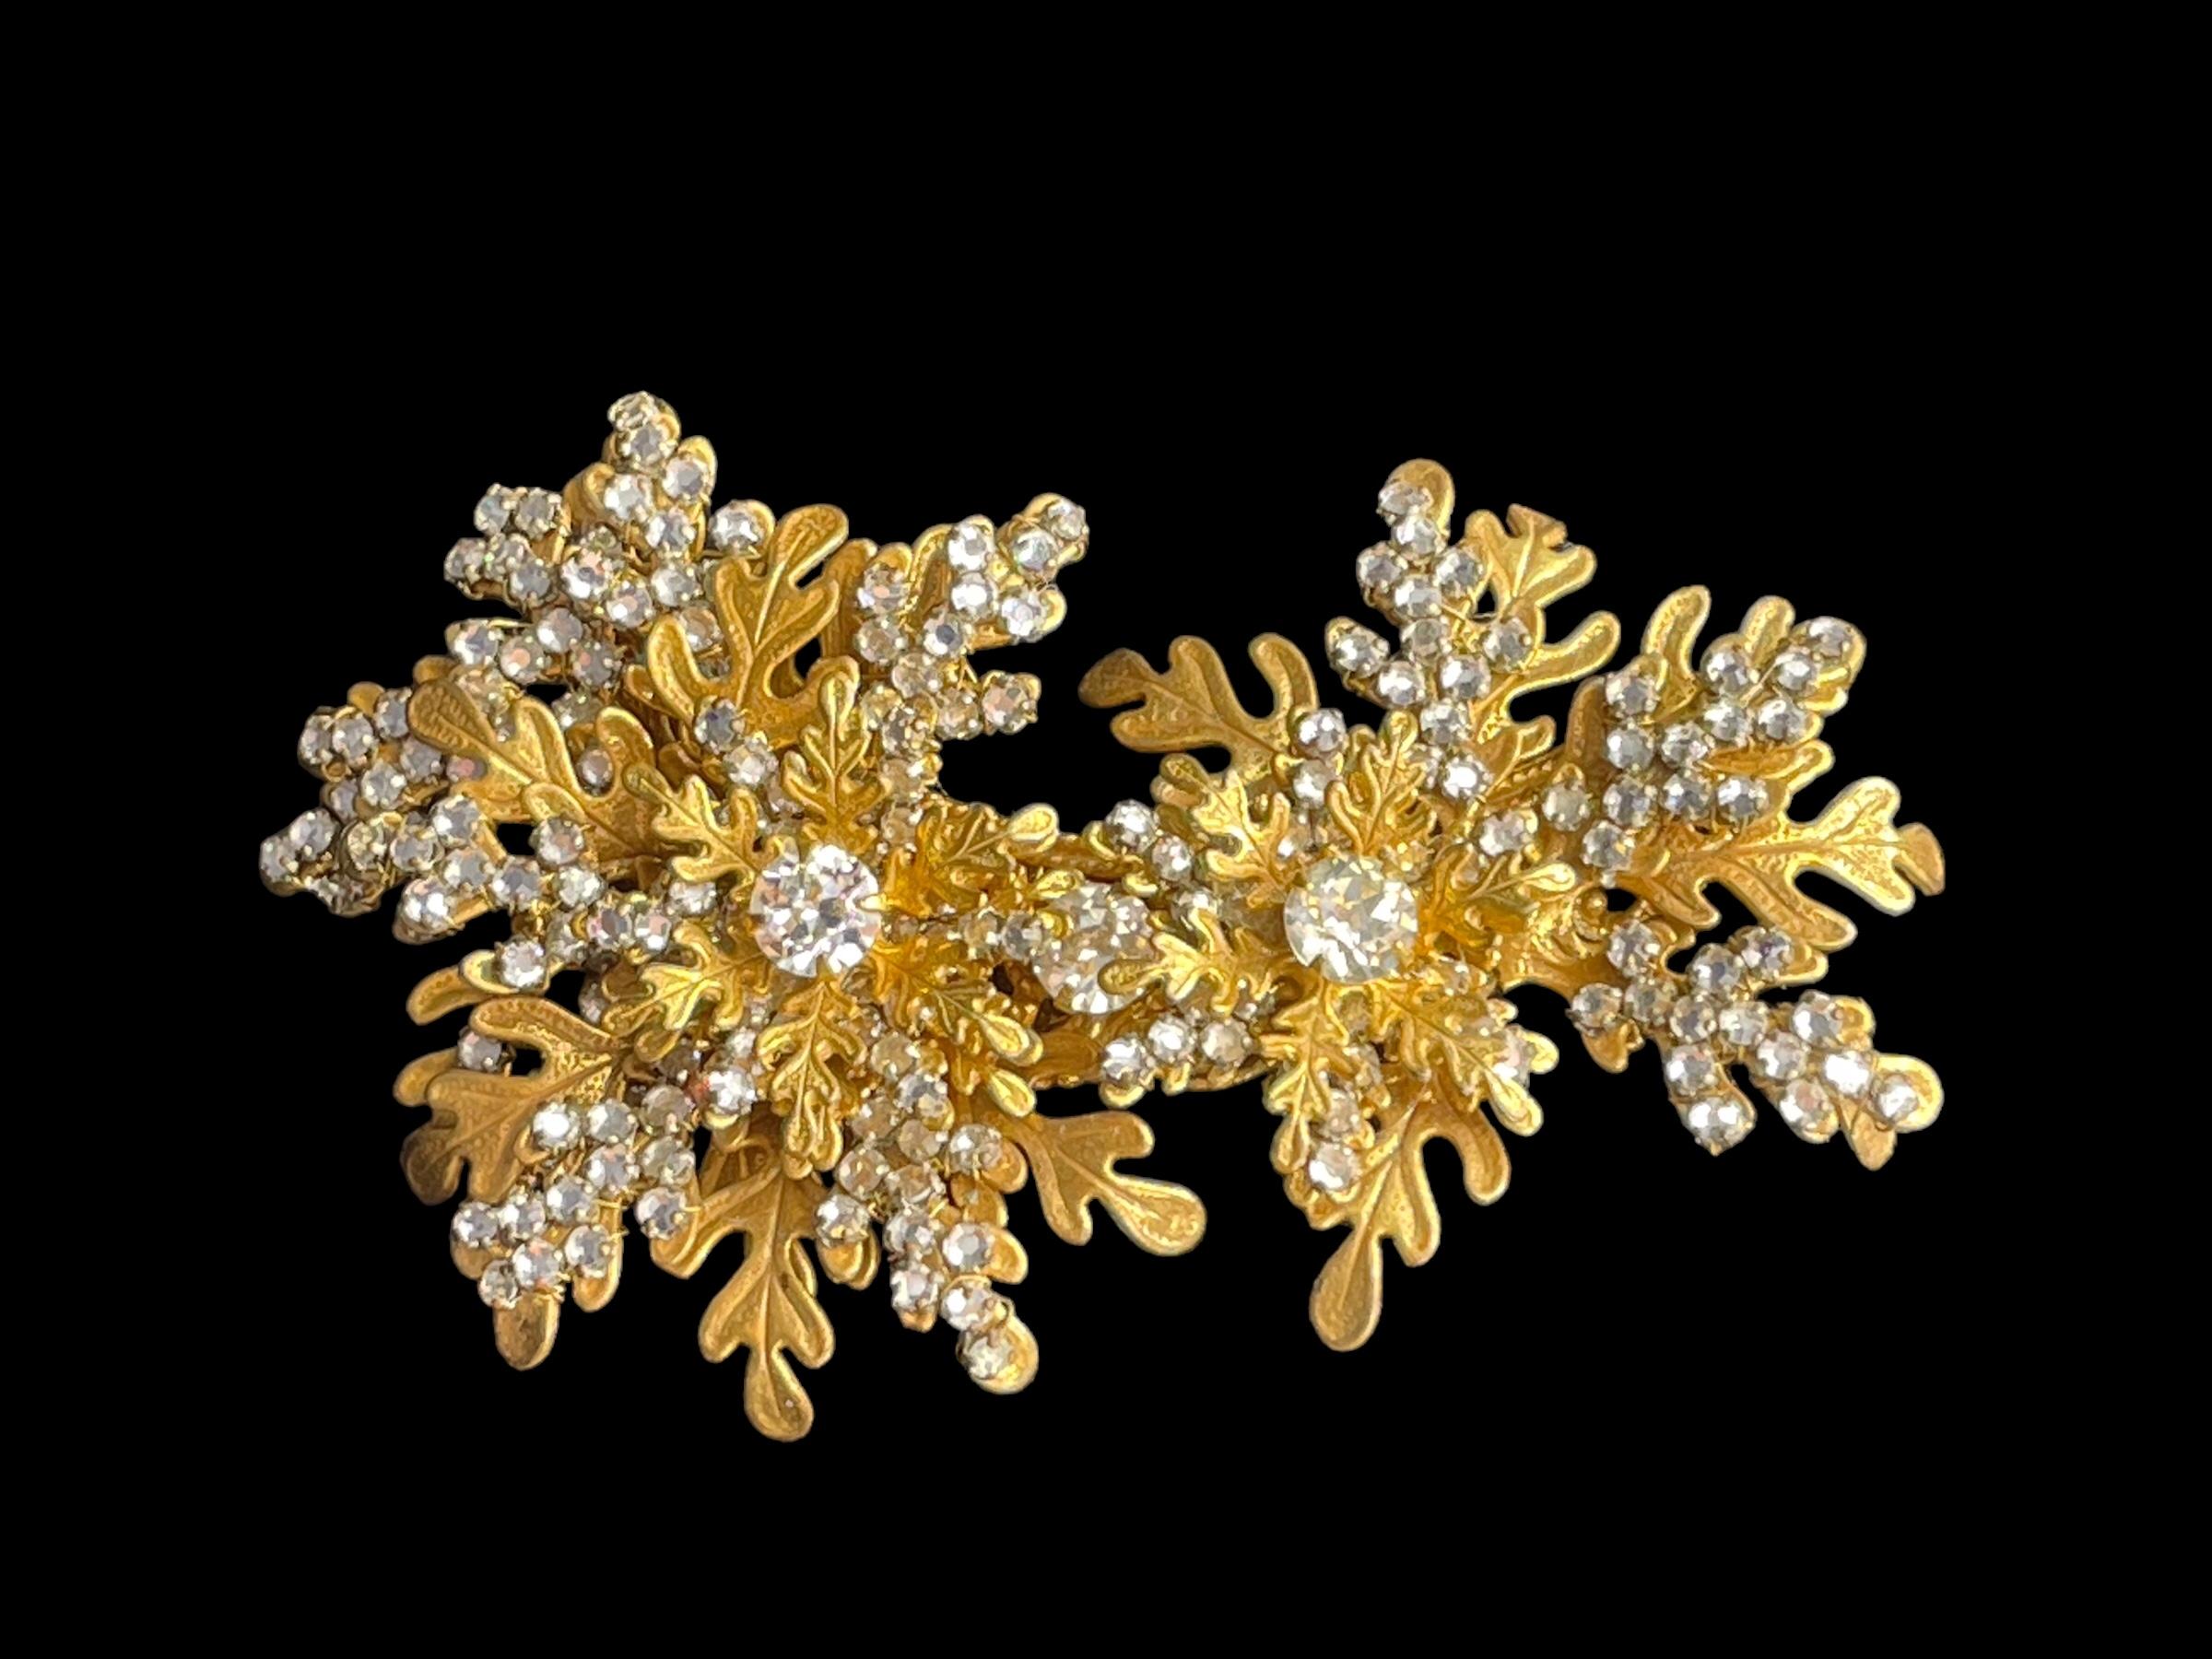 1950s Haskell trembler brooch.
Gilt metal filigree oak leaves are interspersed with clusters of rhinestone berries and highlighted by three larger stones. The two large stones layered at the top of the brooch are set with a wreath of oak leaves.